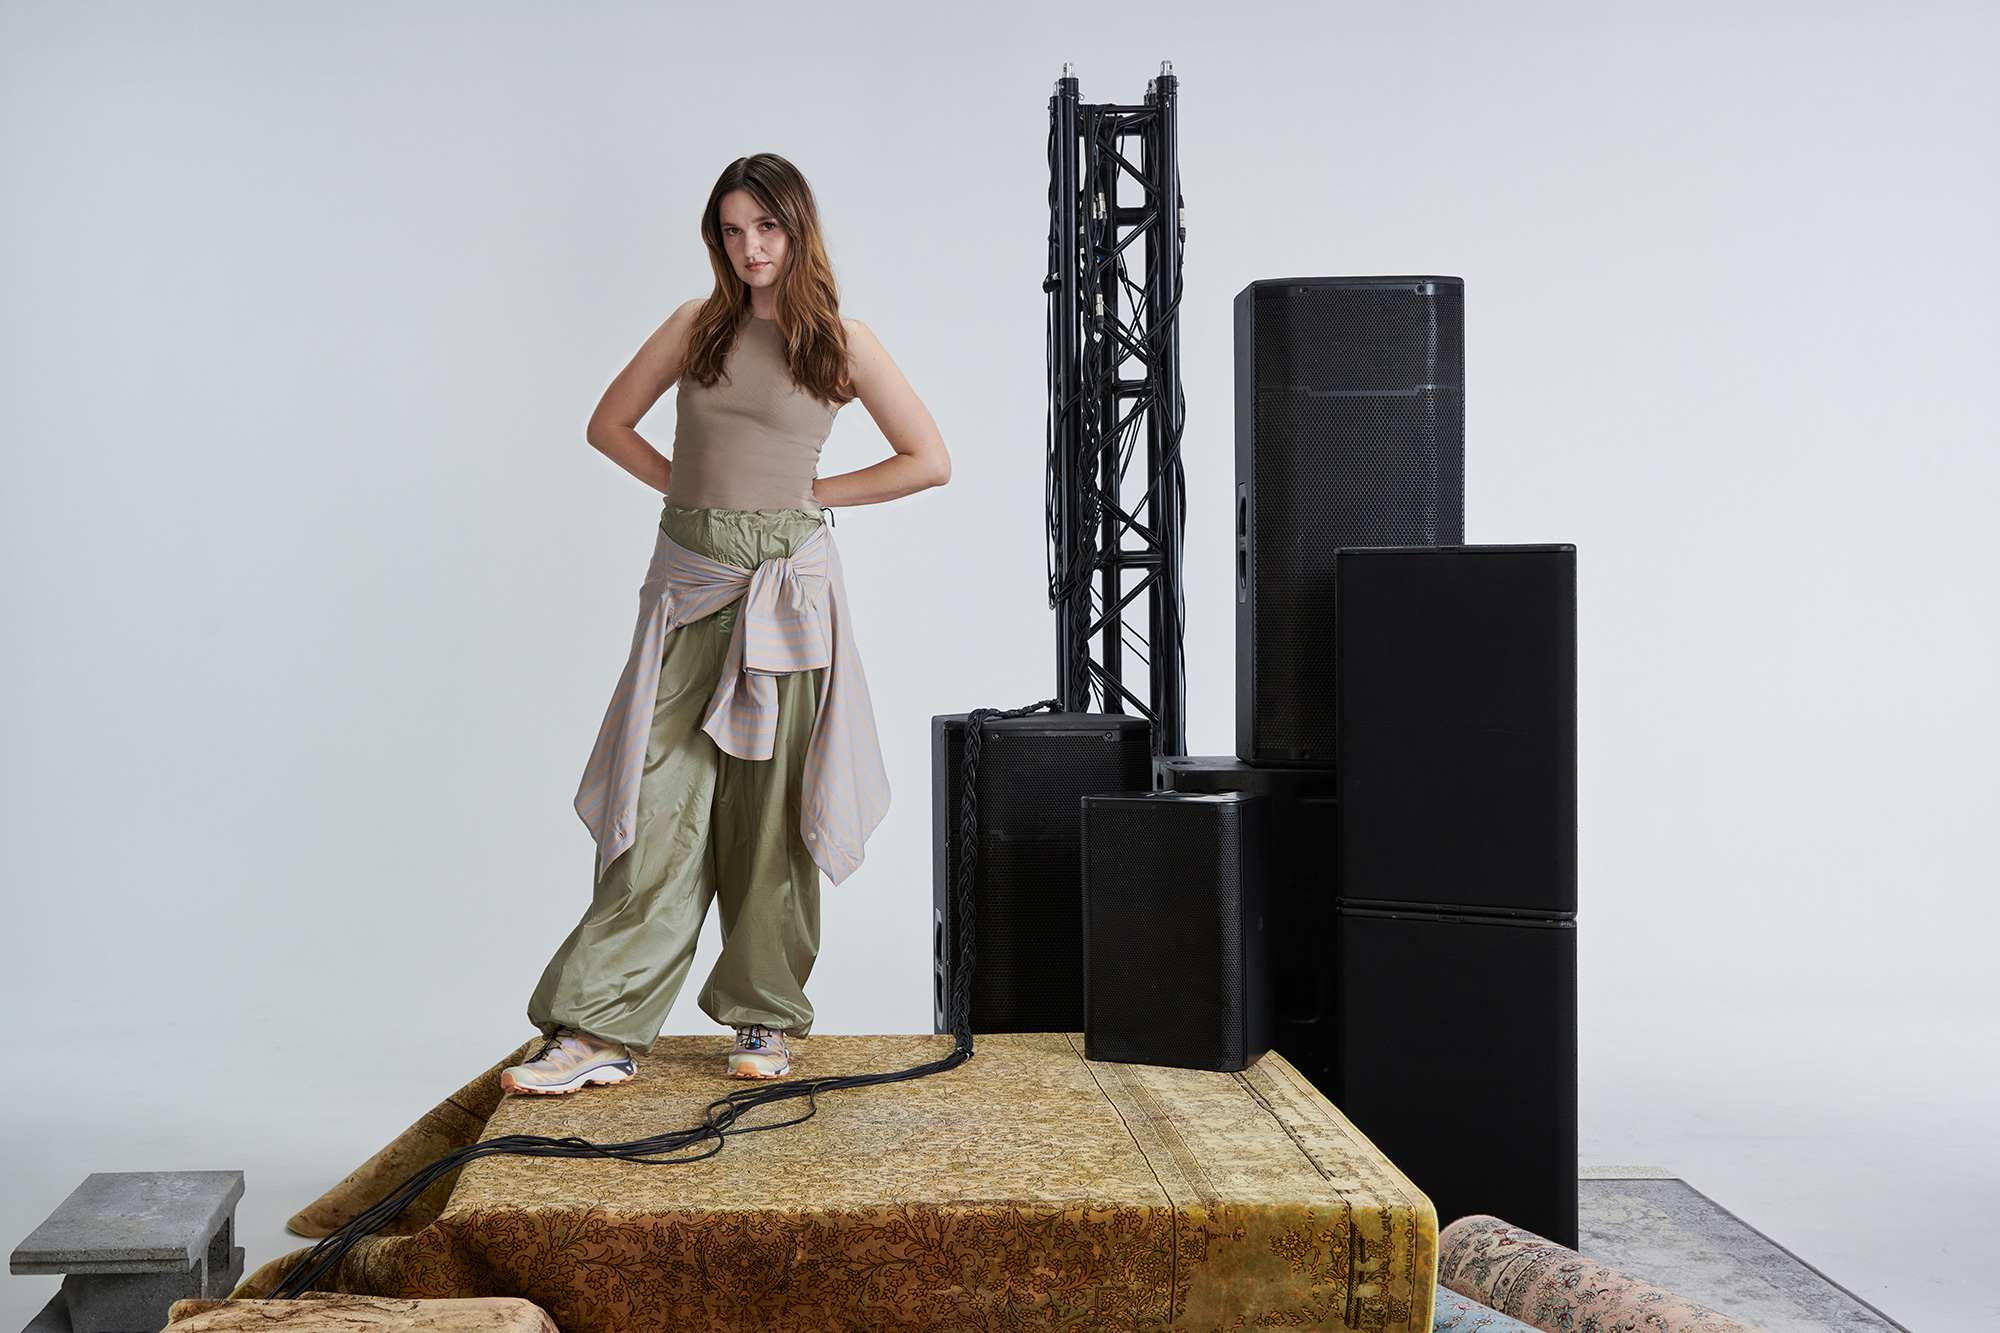 A woman strikes a powerful pose next to heavy-duty sound equipment